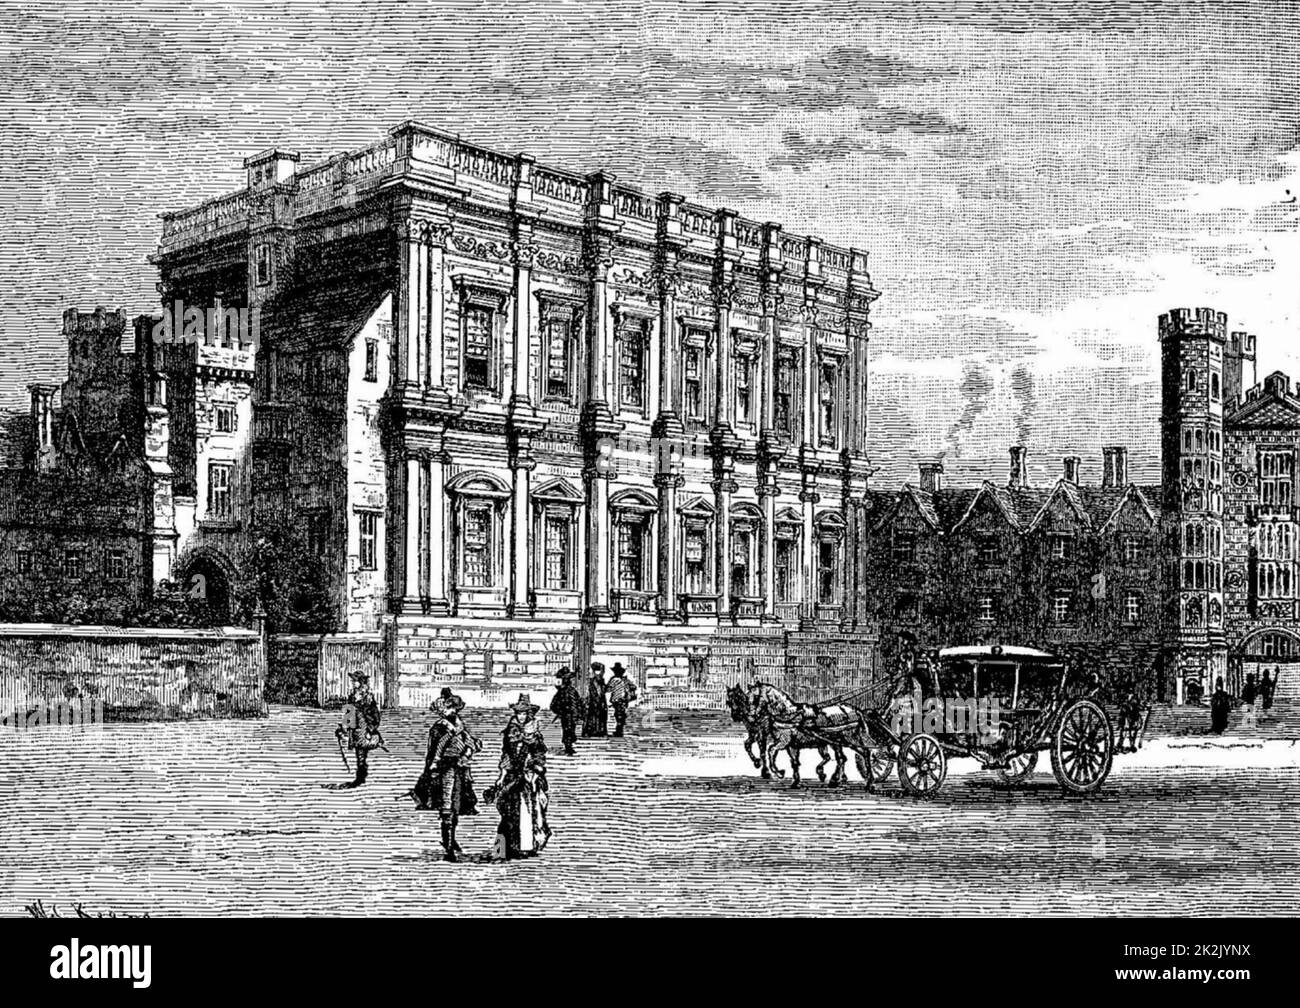 The Banqueting House, Whitehall, London. Circa 1640-70. Architect: Inigo Jones. From an engraving in Cassells England Stock Photo